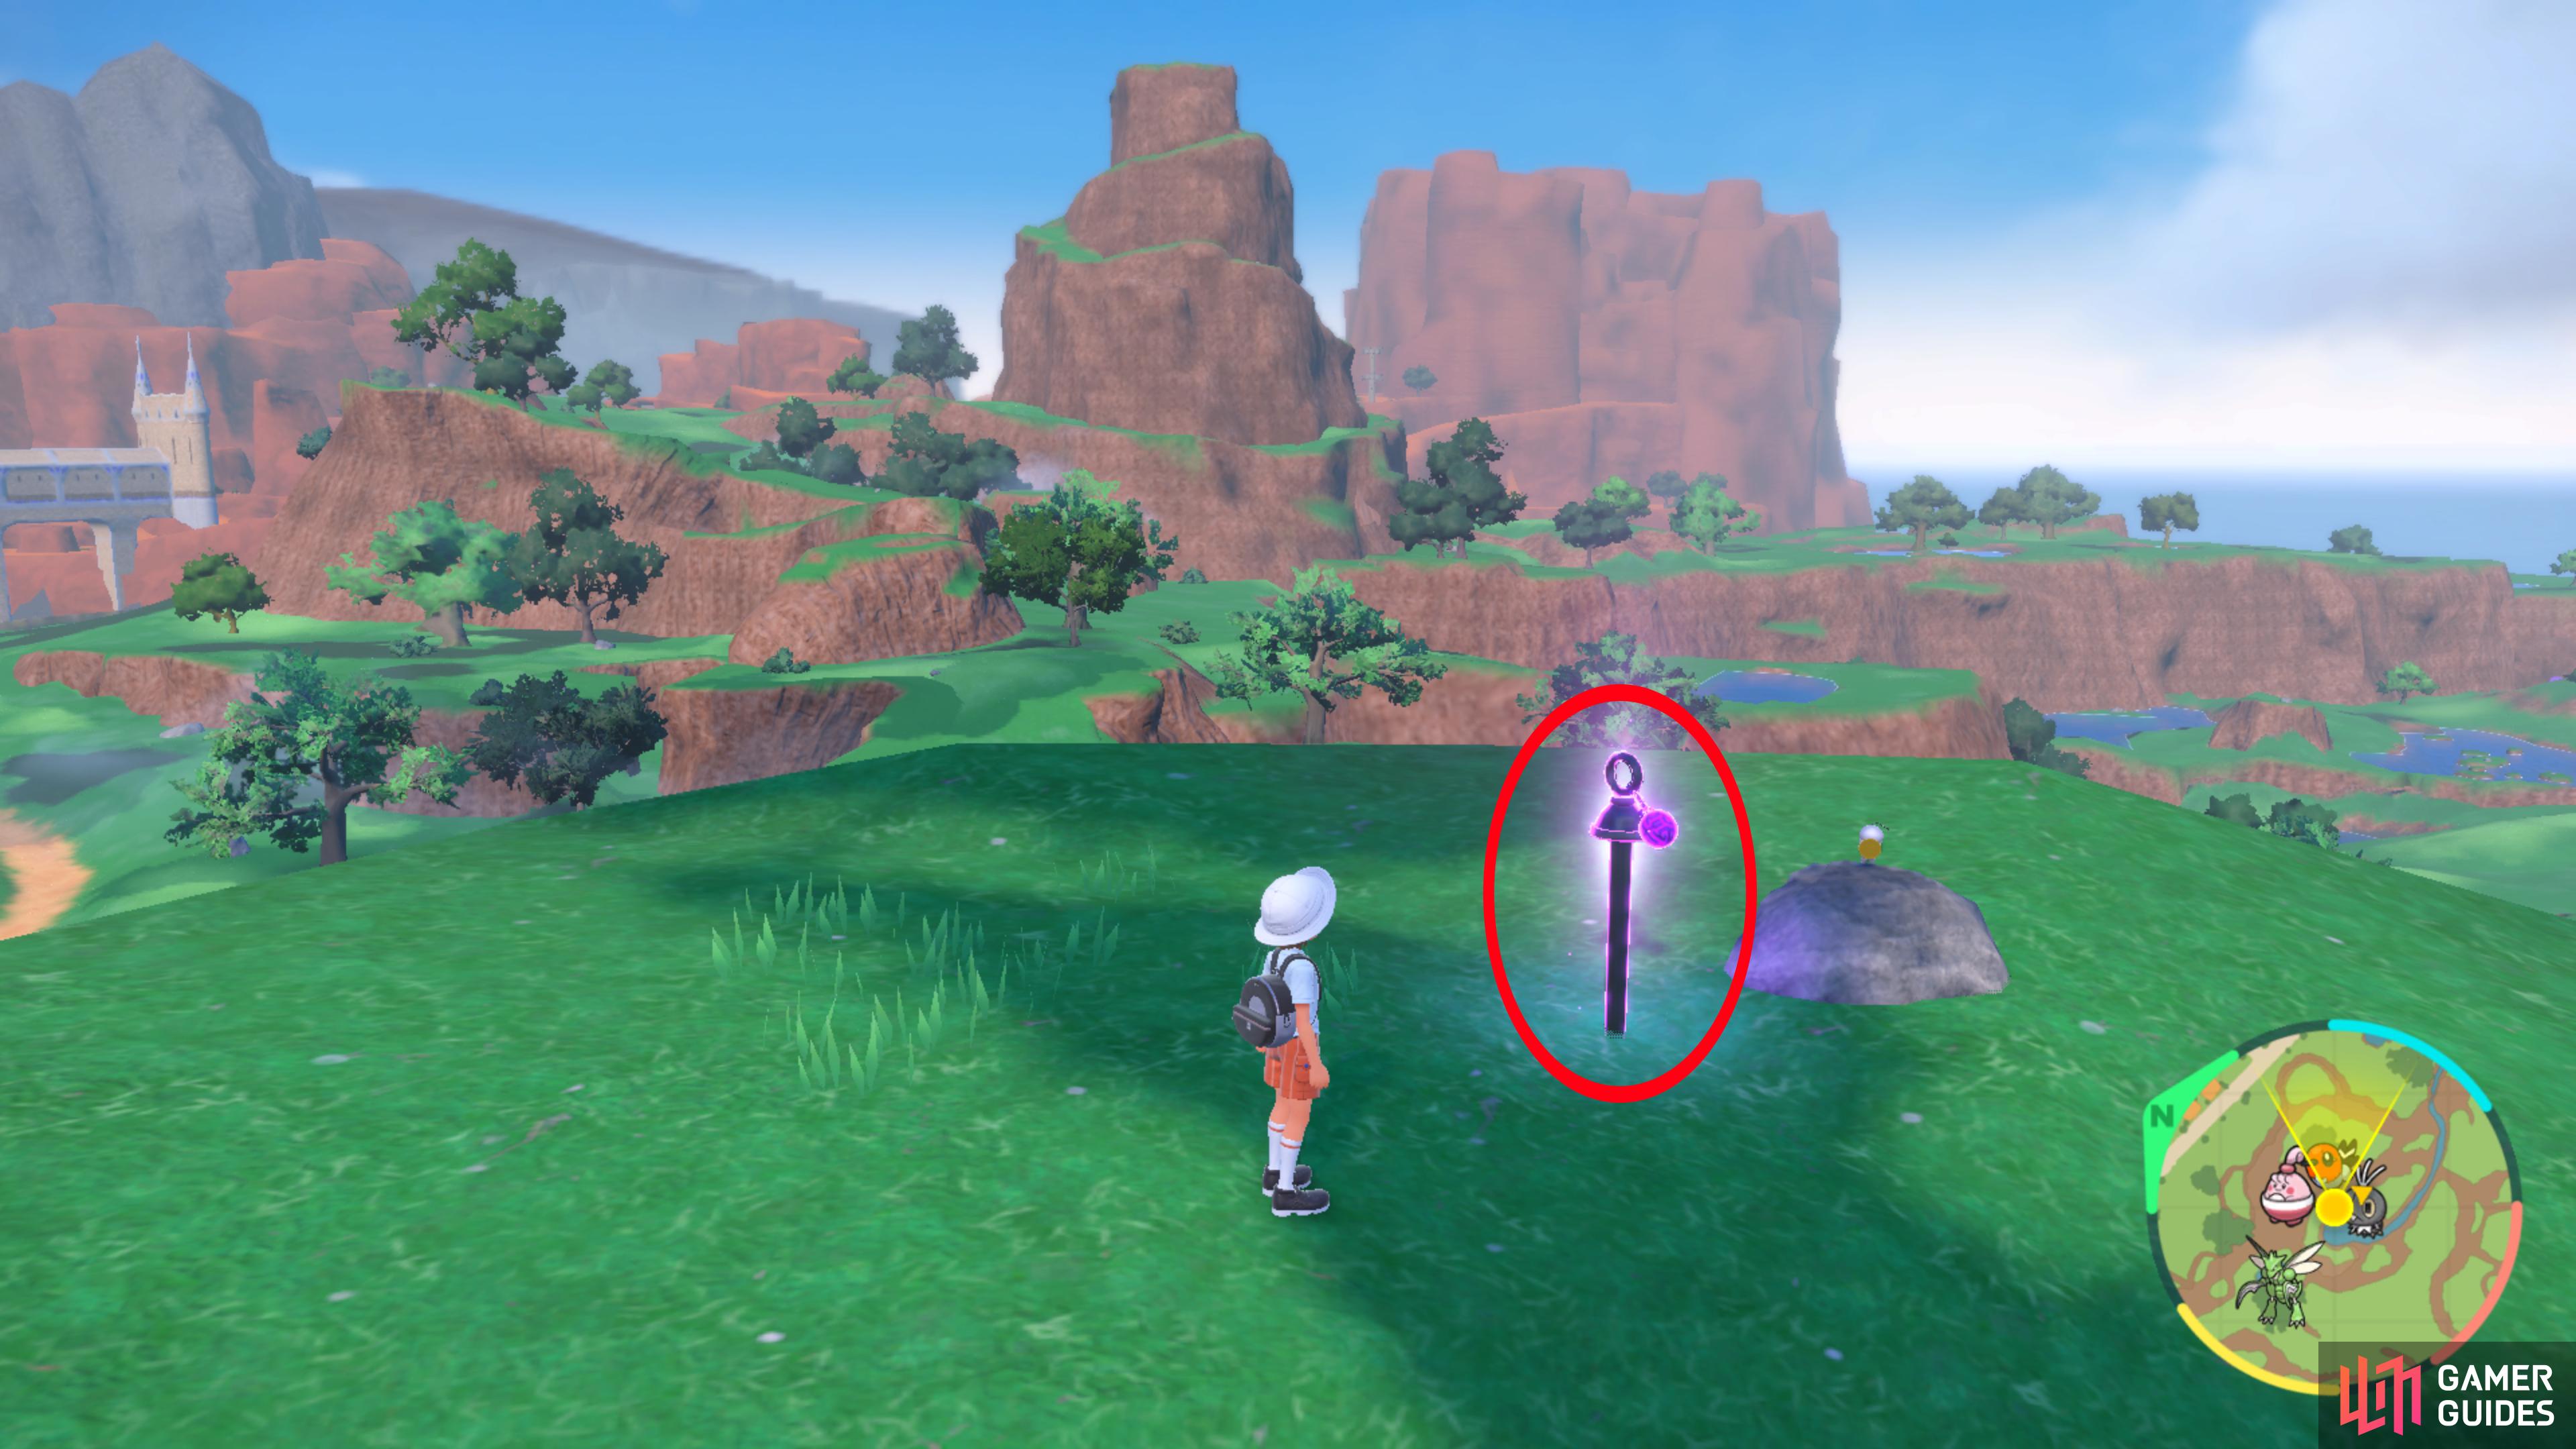 the purple stake can be found overlooking Los Platos.